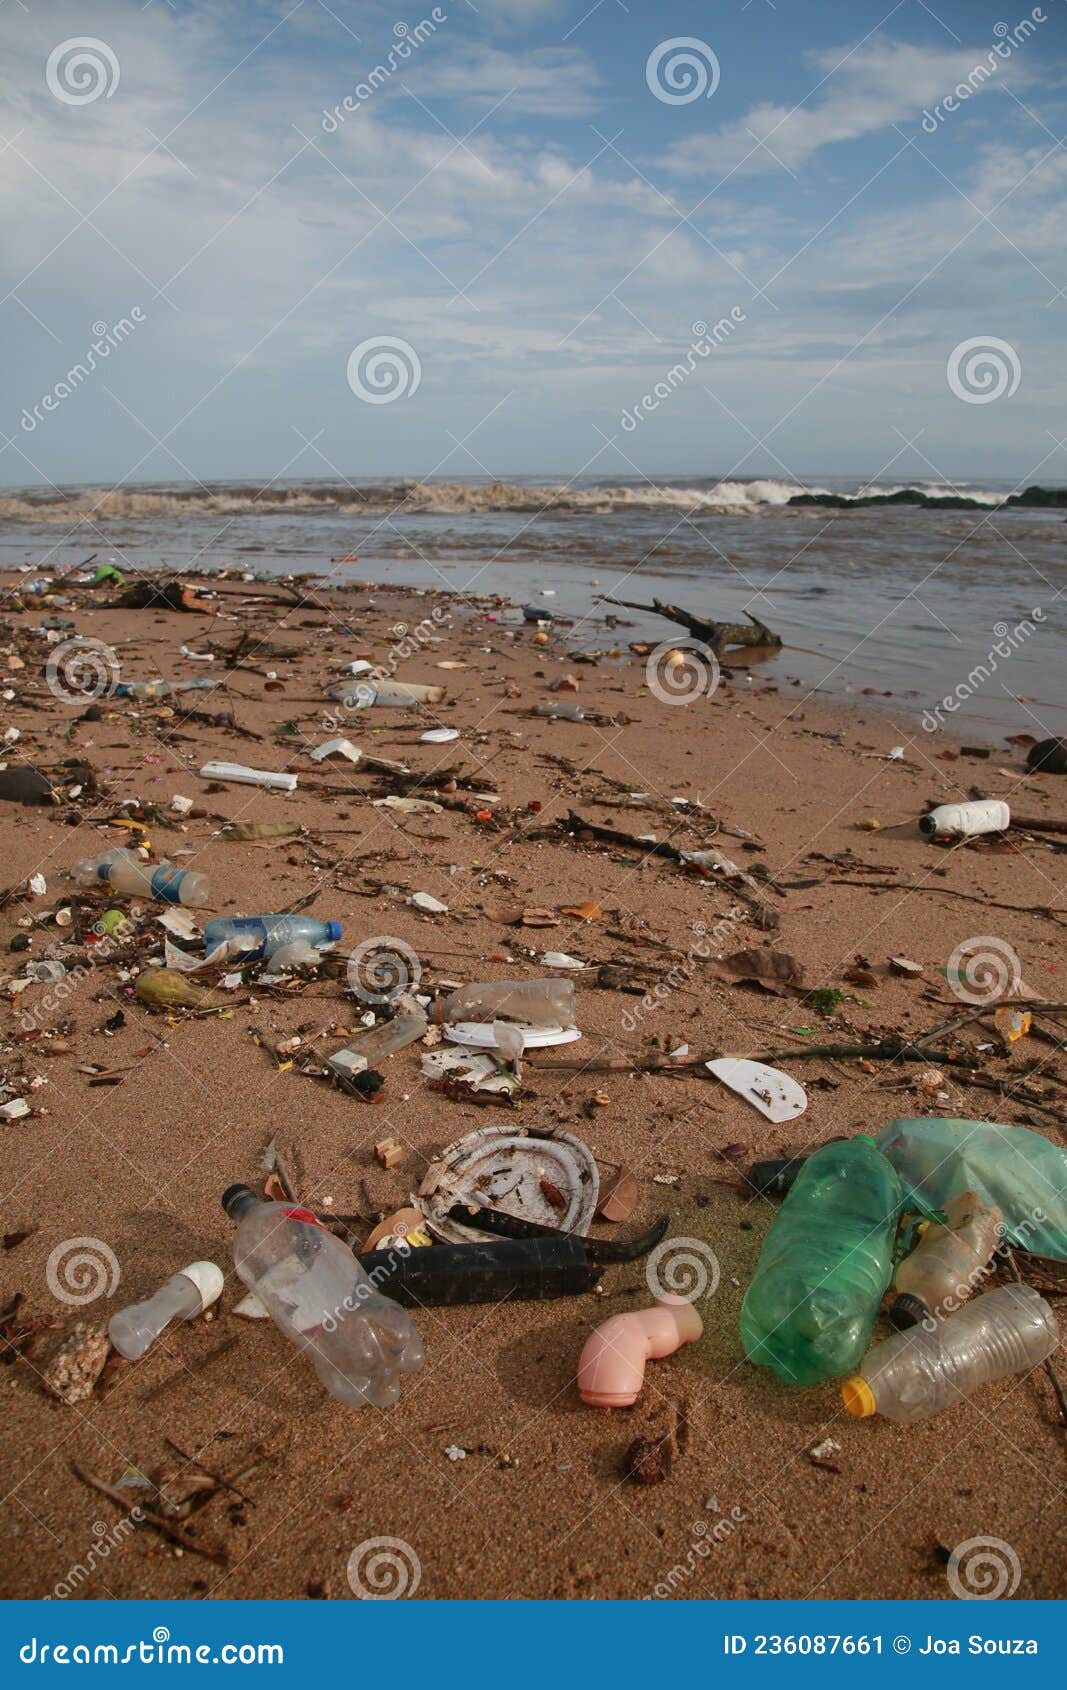 plastic and garbage on the beach sand